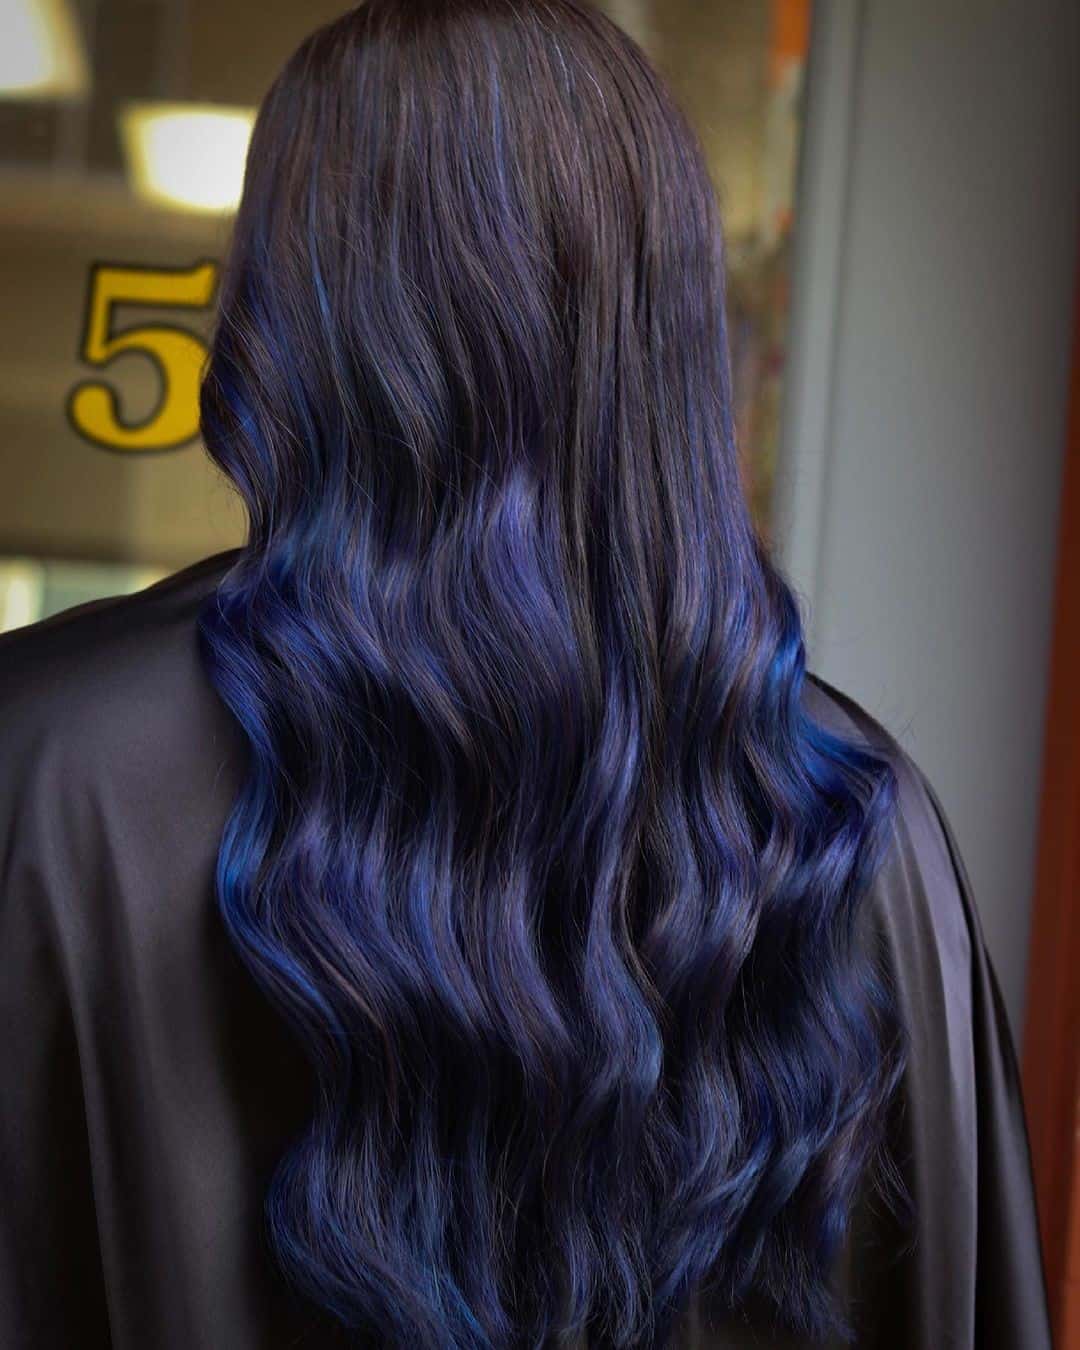 Long Black And Blue Hair Extensions 